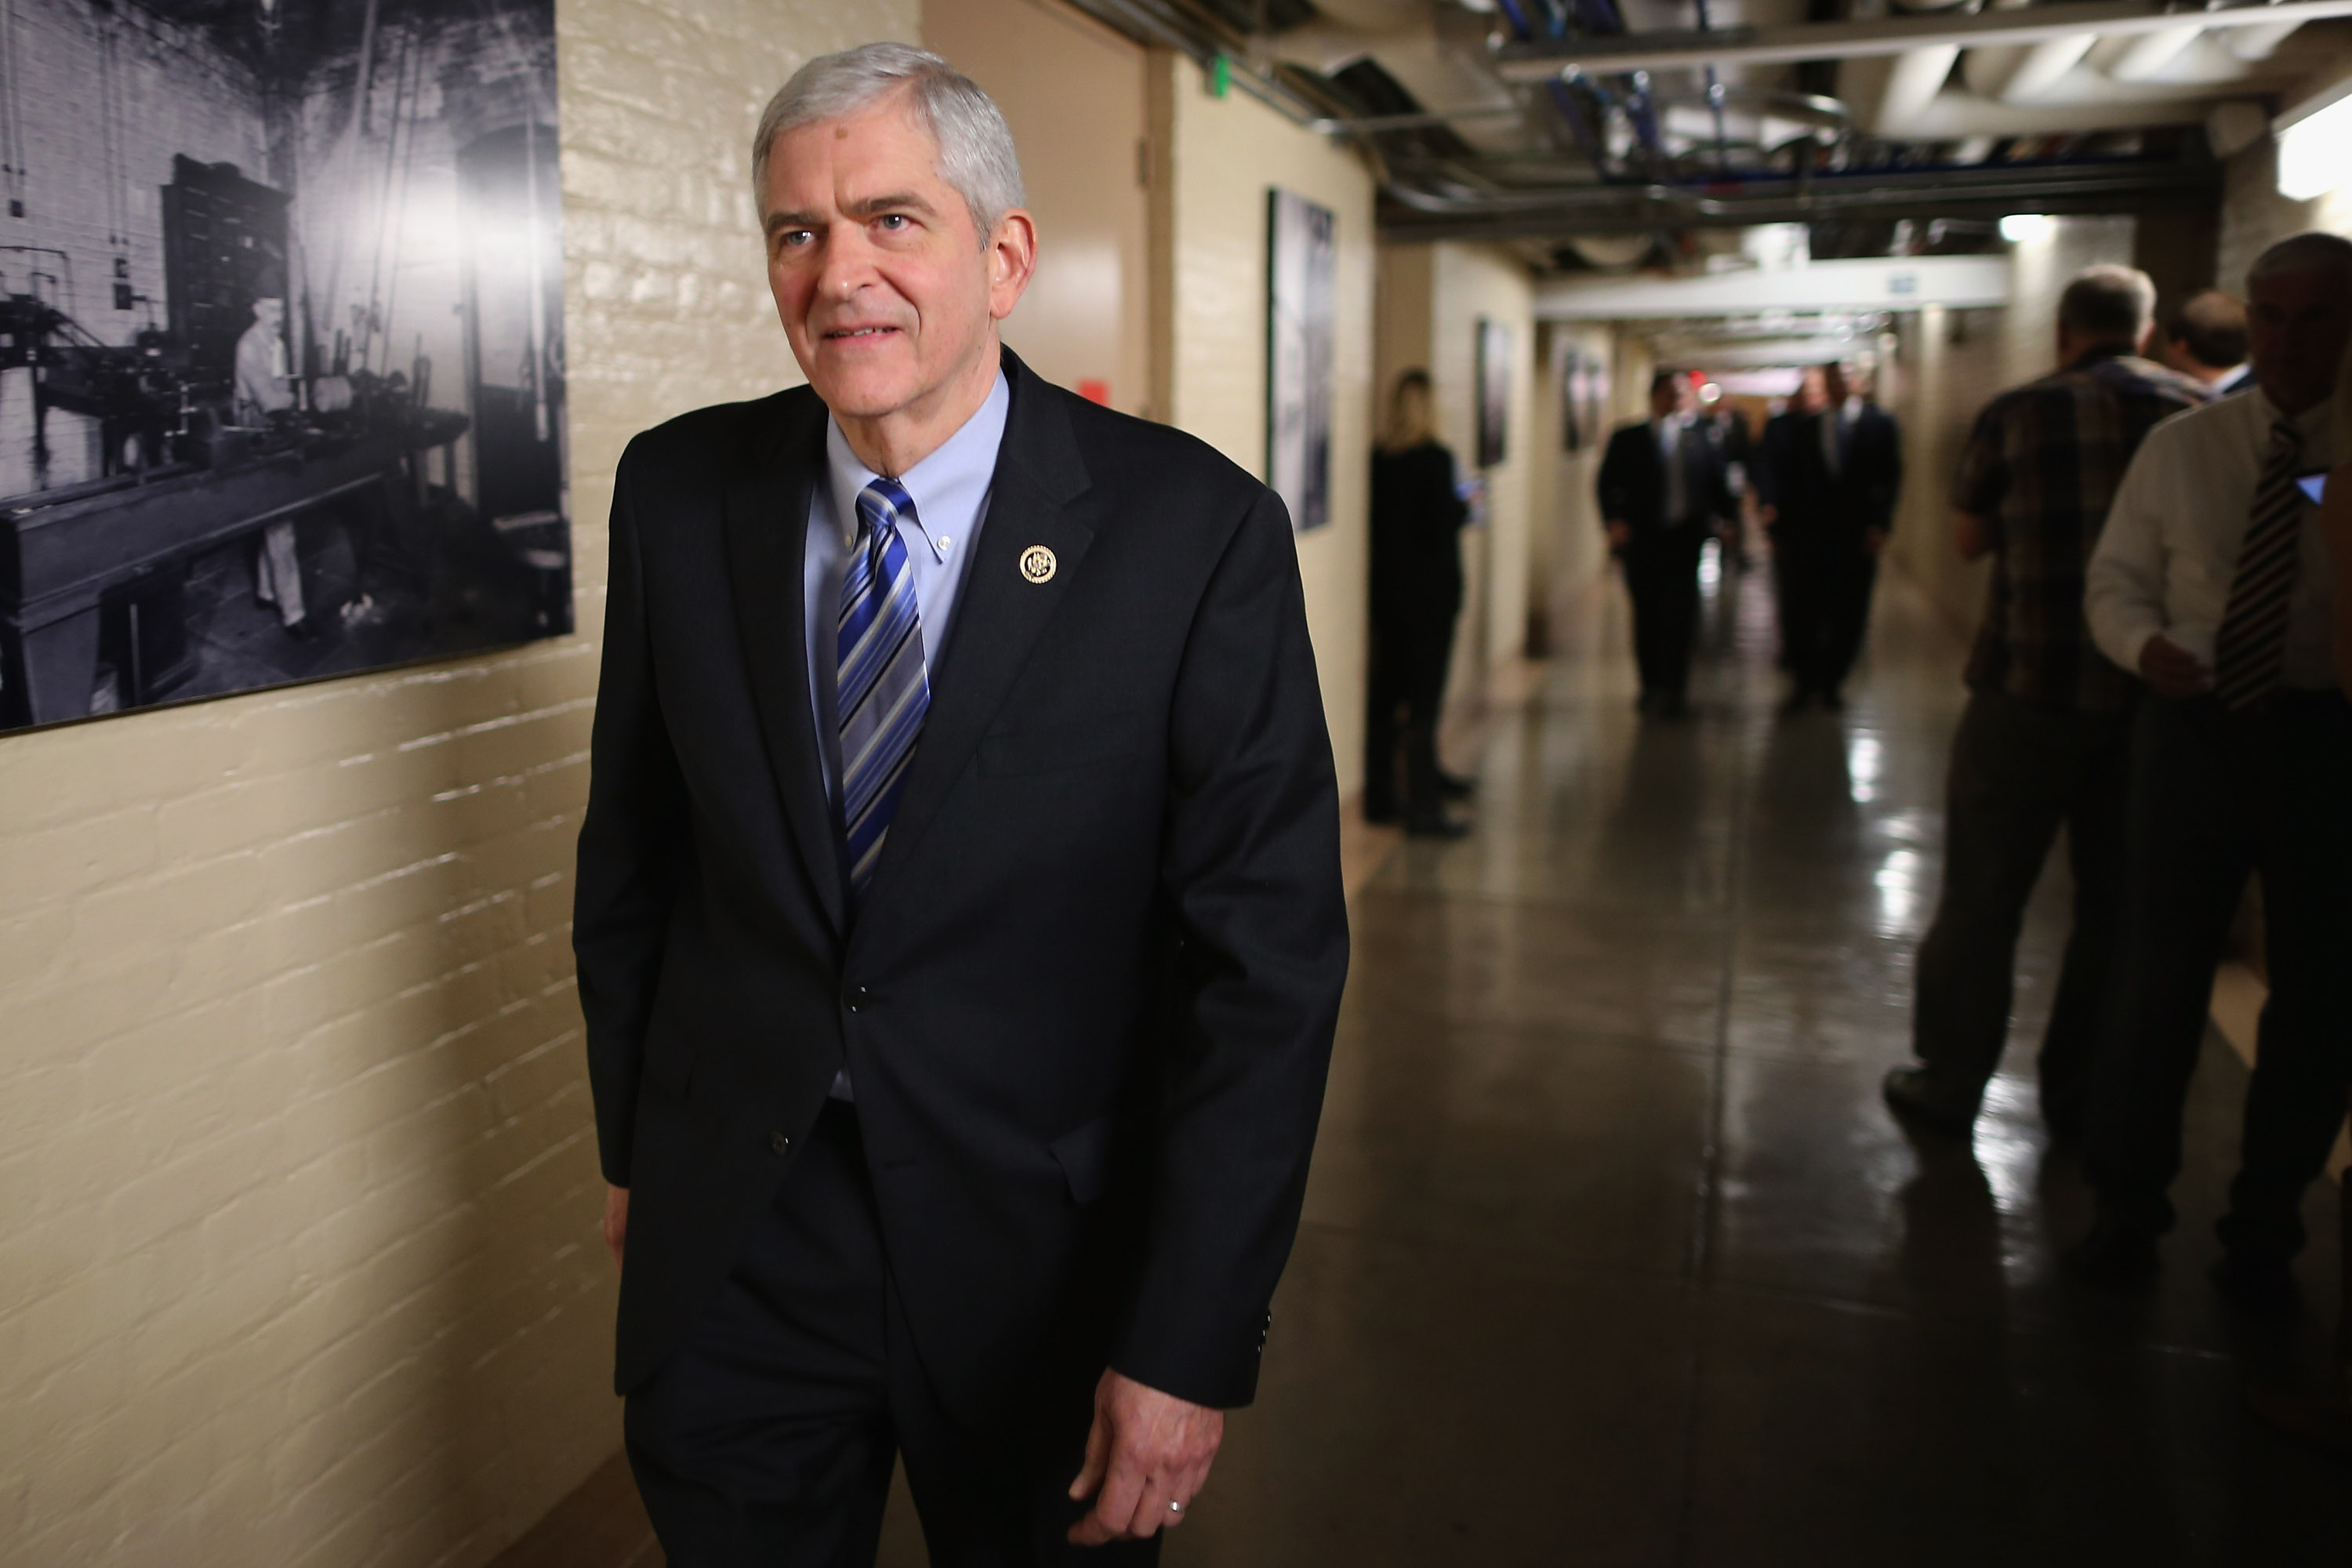 Rep. Daniel Webster (R-FL) heads for a House Republican caucus meeting in the basement of the U.S. Capitol in Washington, D.C., on Oct. 9, 2015.